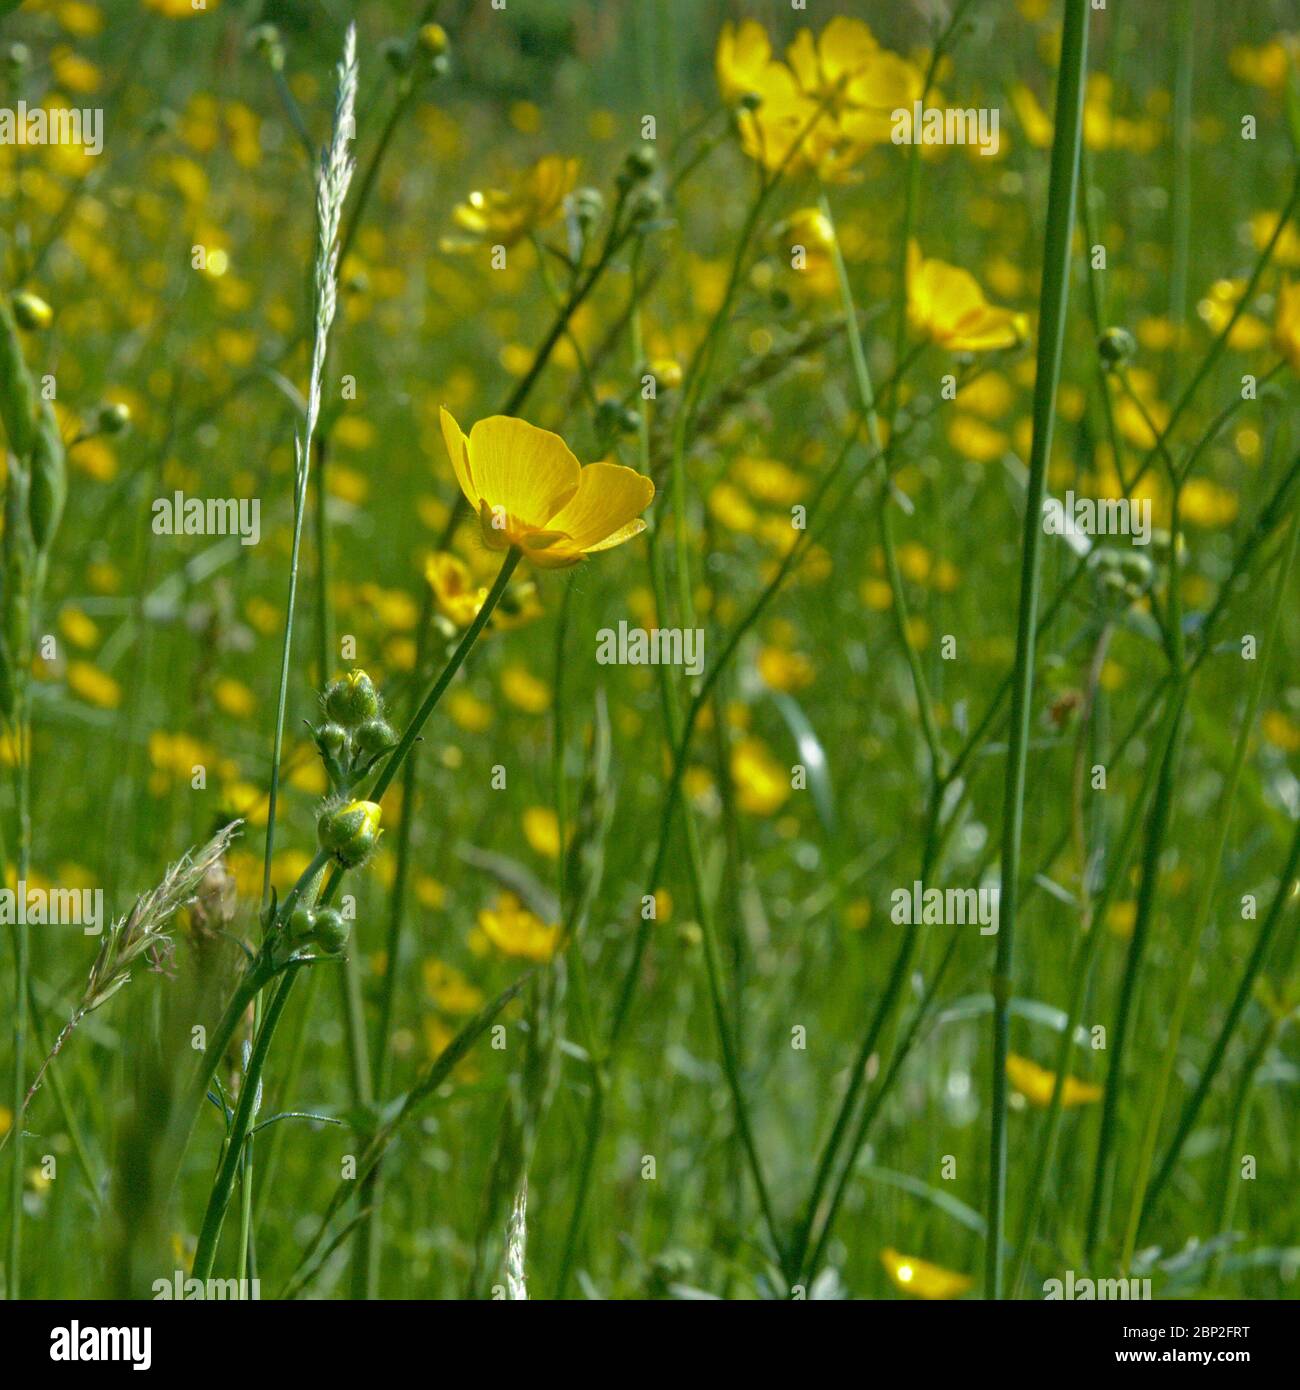 Low angle side view on bright yellow buttercup flowers in a meadow, selectivee focus - Ranunculus bulbosus Stock Photo